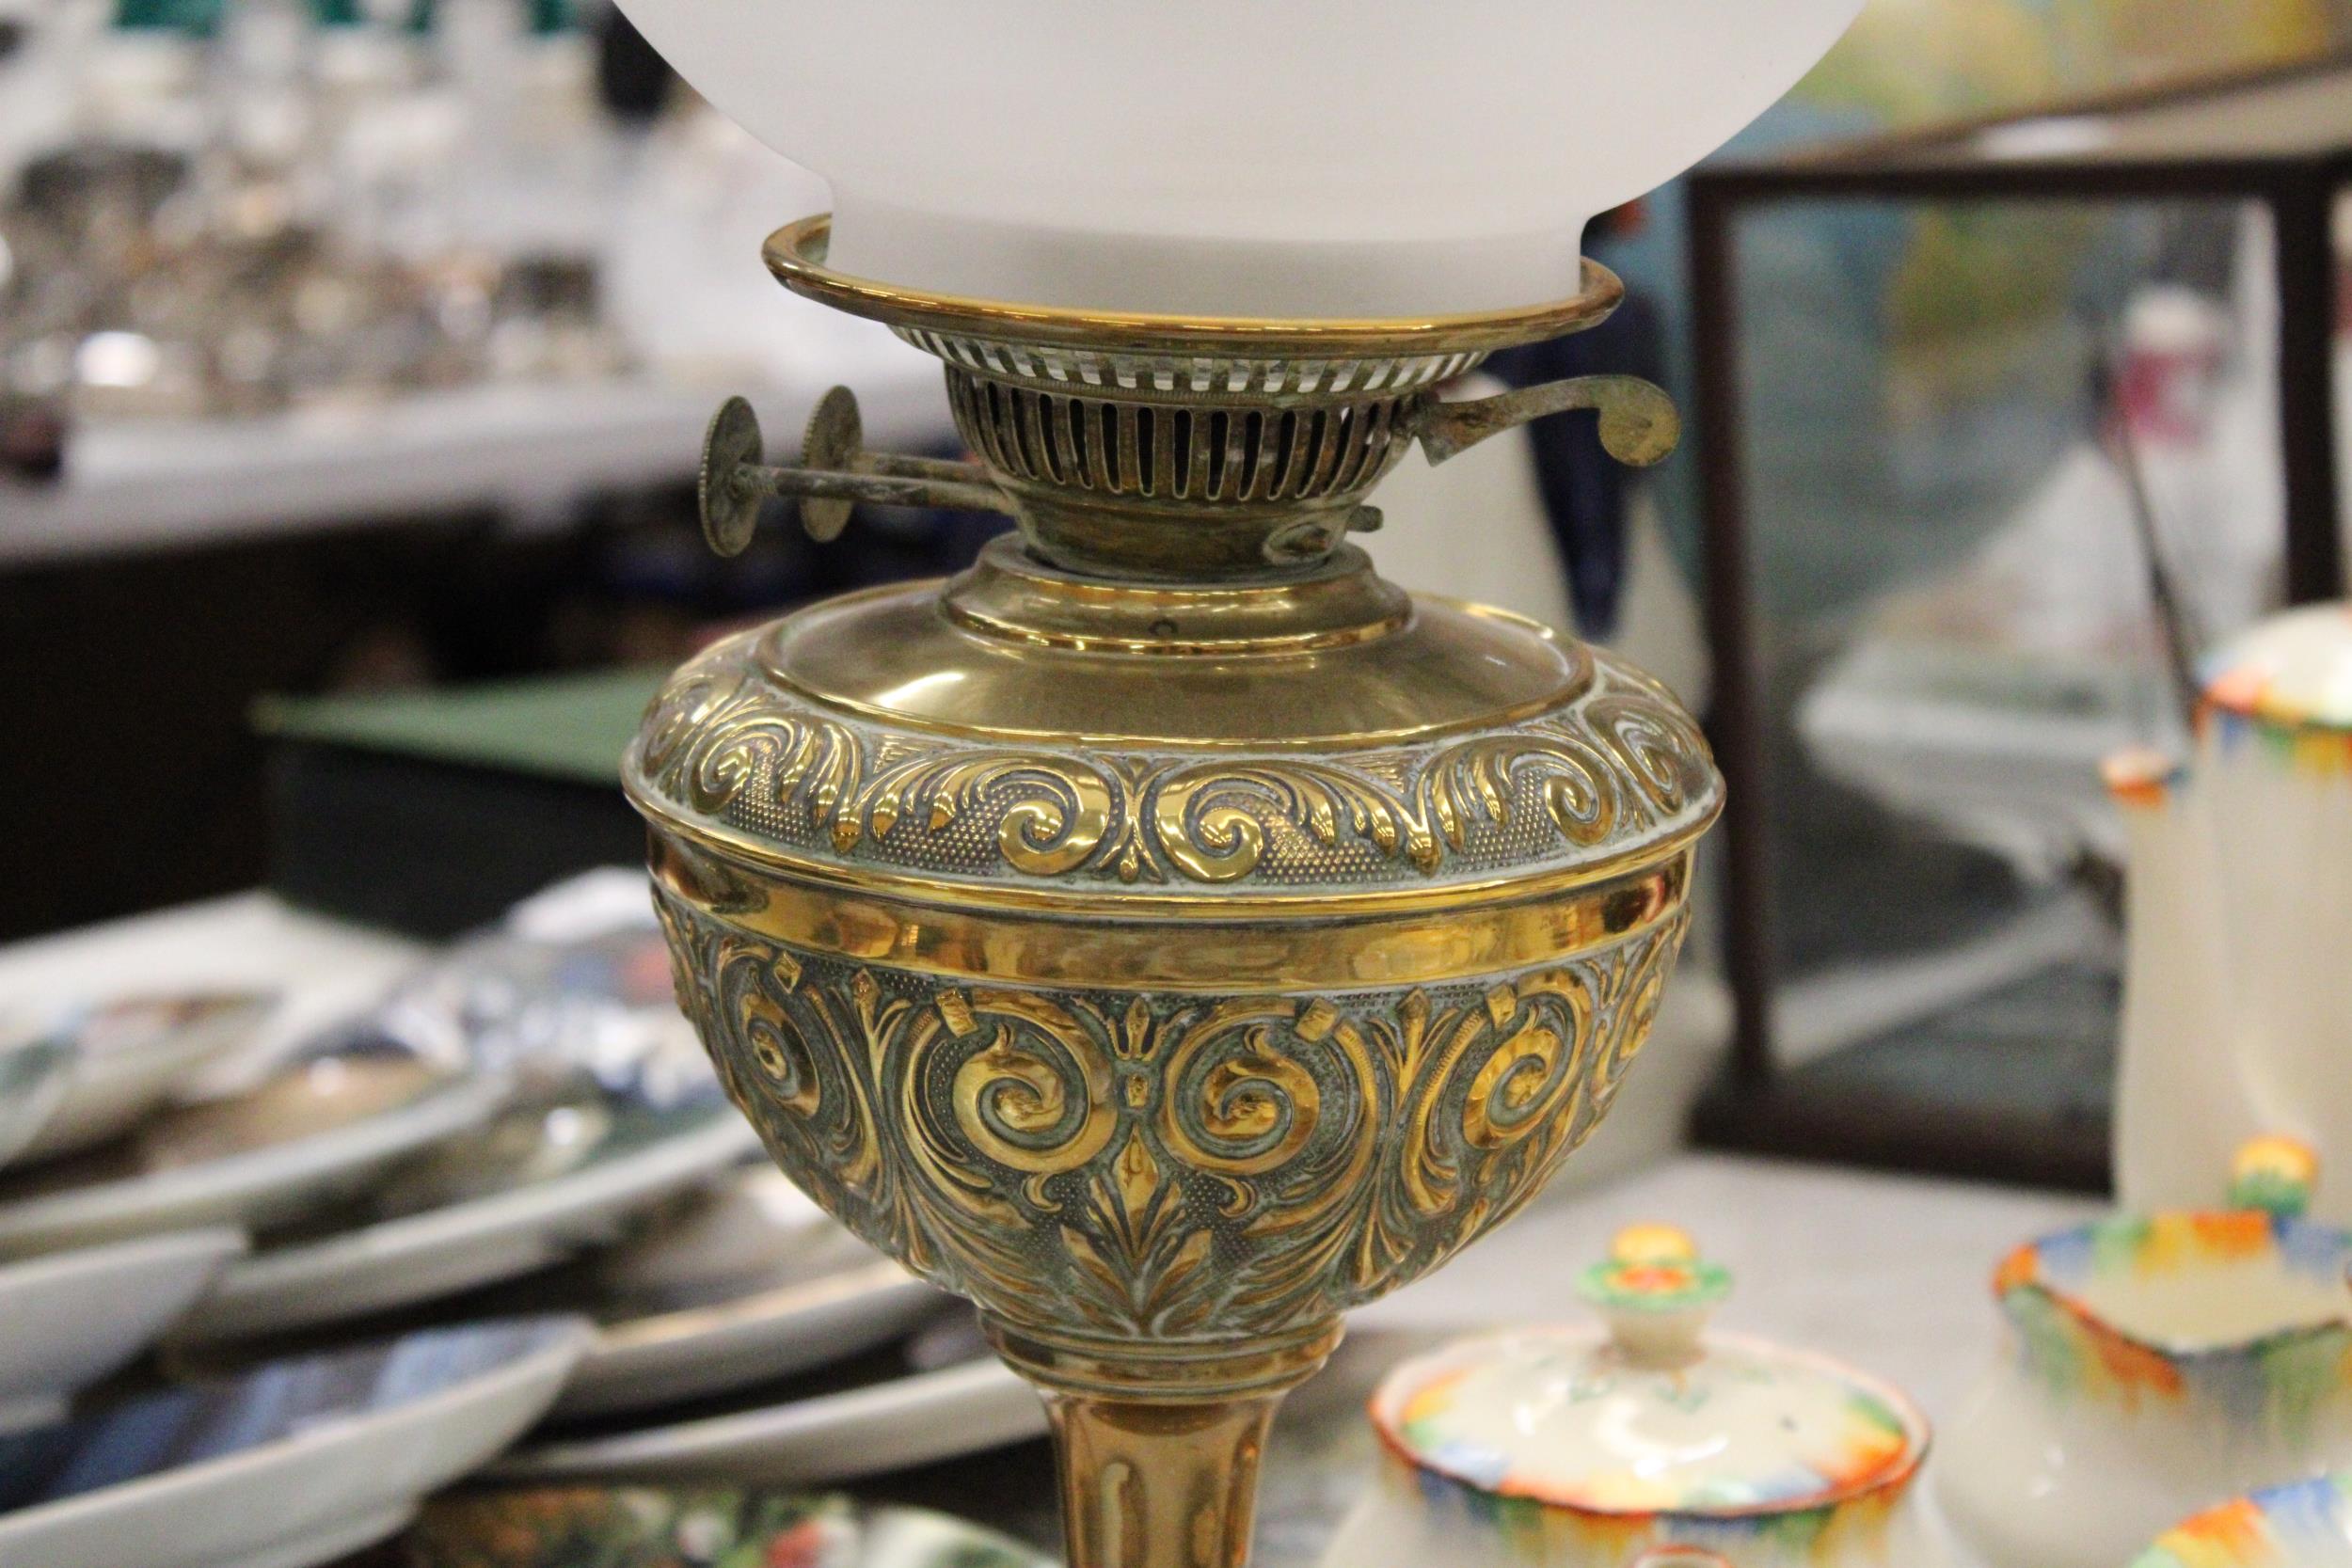 A VINTAGE BRASS OIL LAMP WITH ENGRAVING, A FUNNEL AND ROUND ETCHED GLASS SHADE, HEIGHT APPROX 53CM - Image 3 of 5